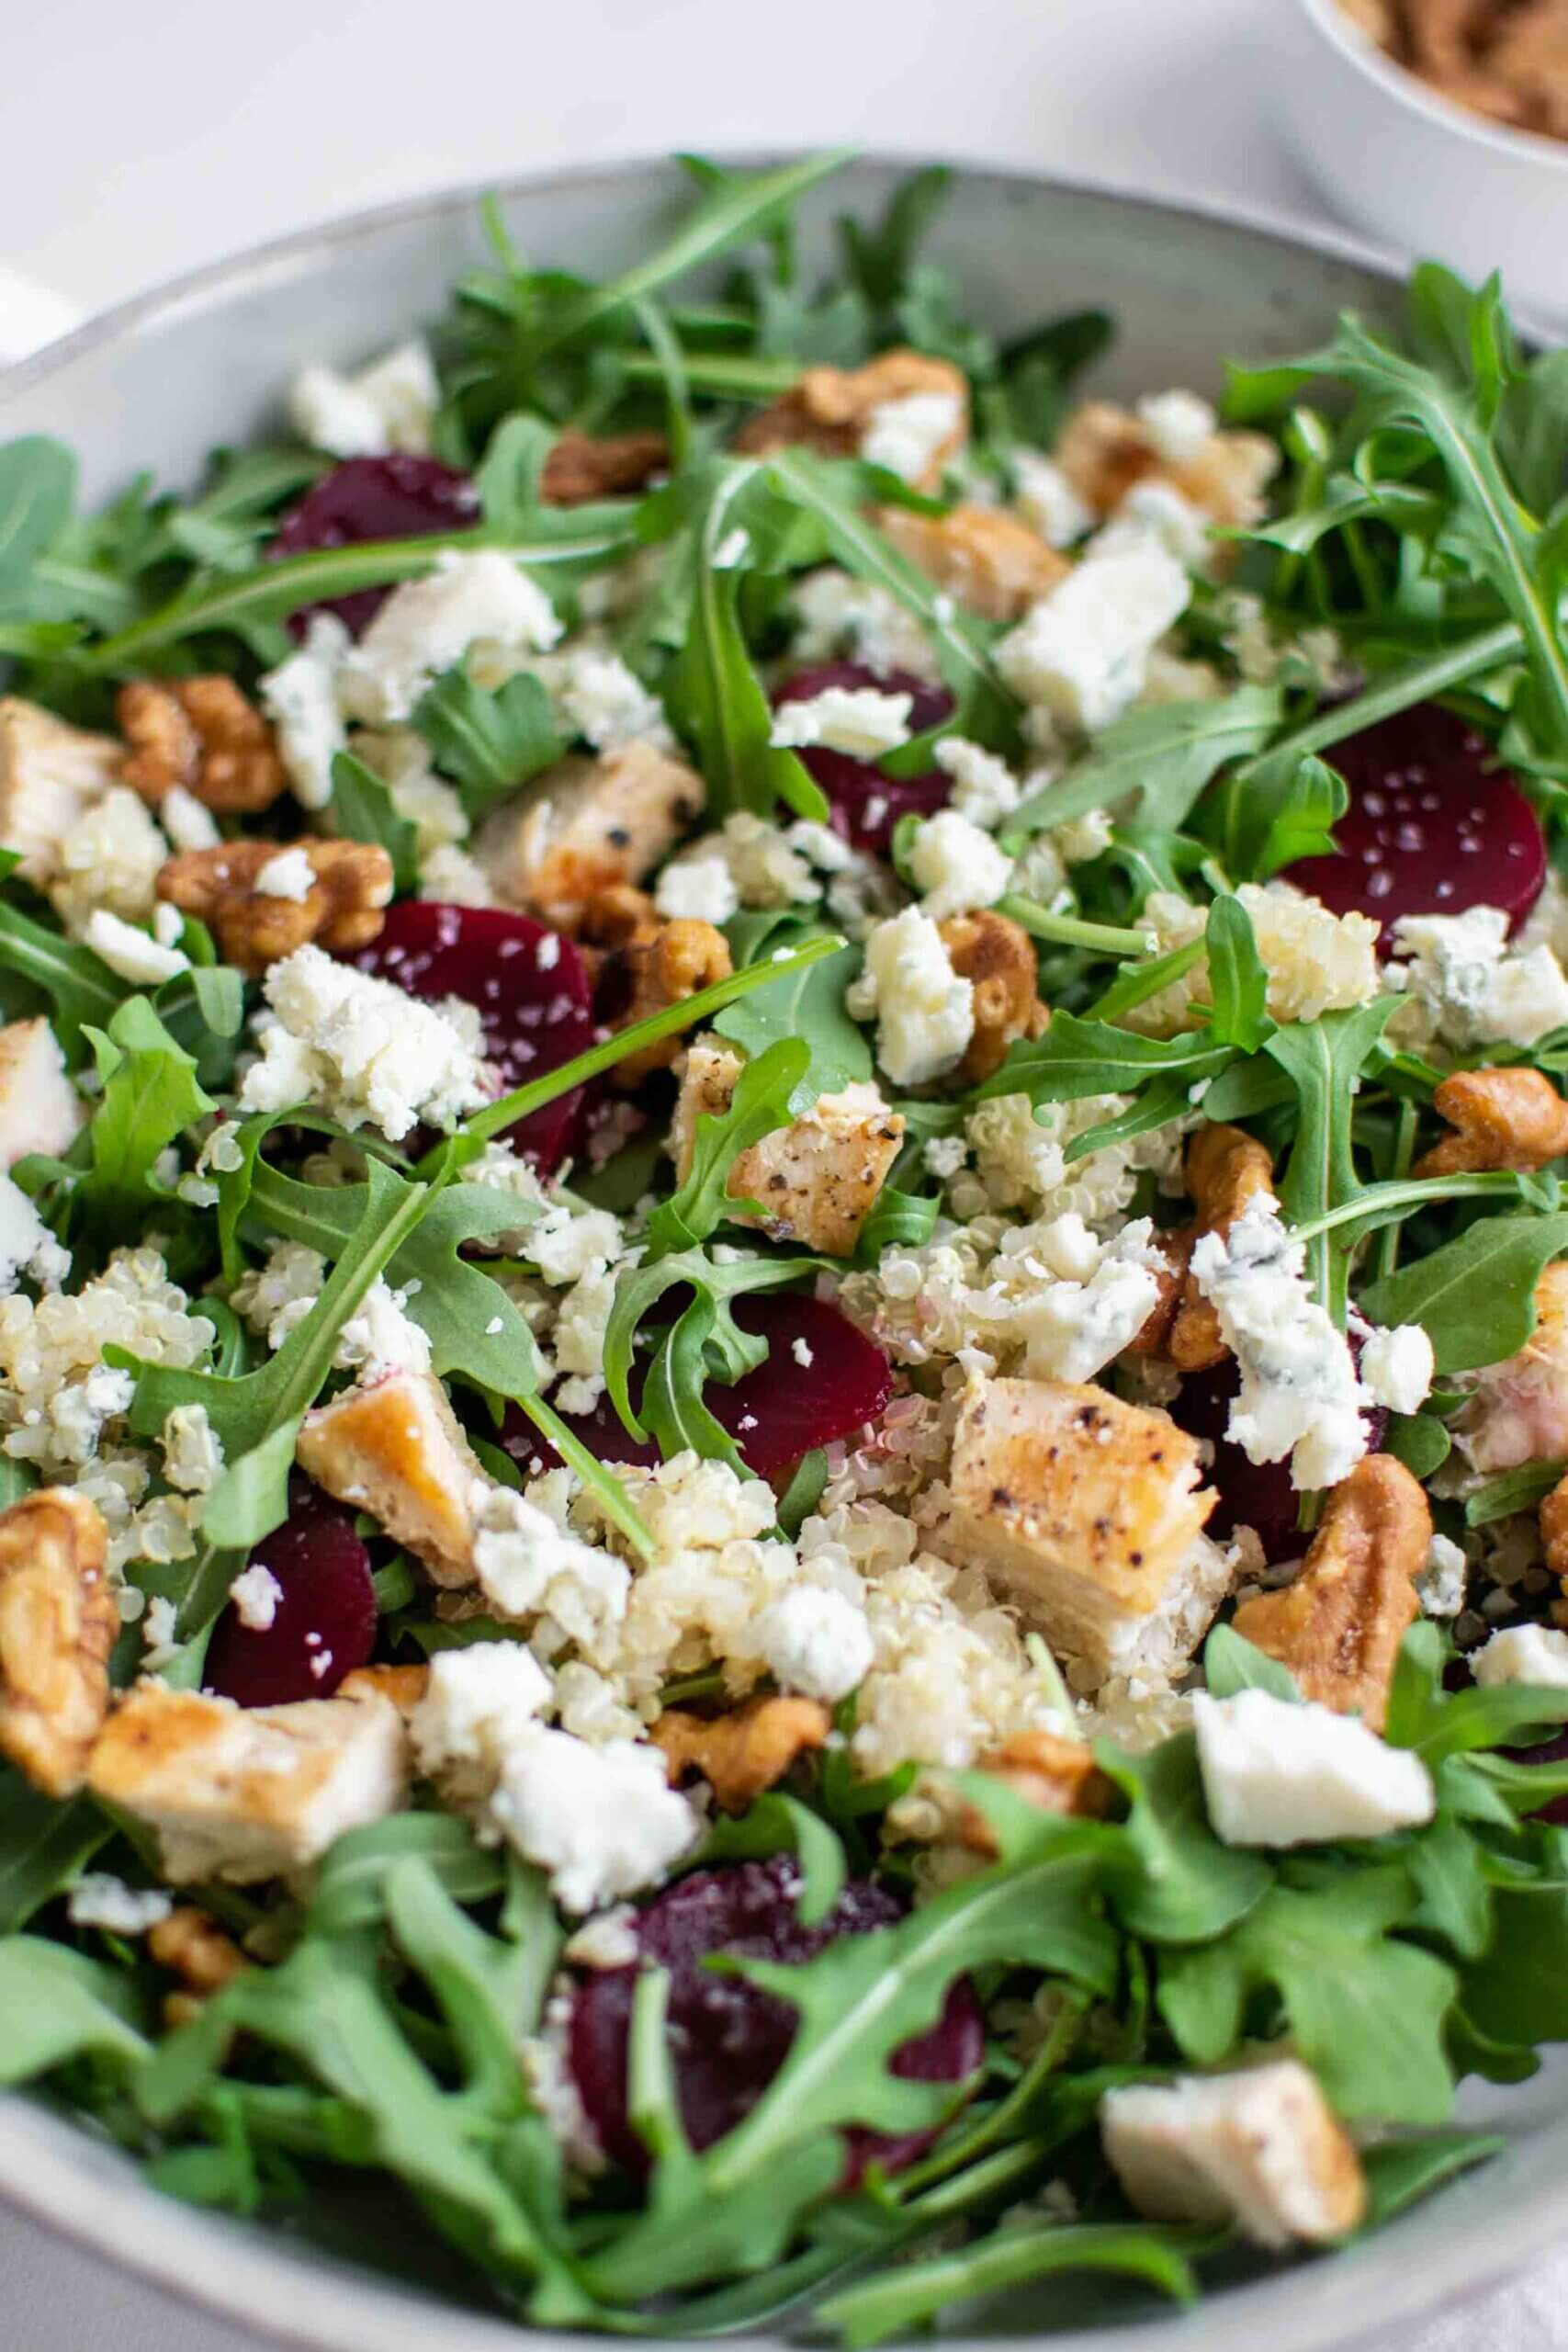 Quinoa and arugula salad in a bowl with beets, chicken and gorgonzola cheese